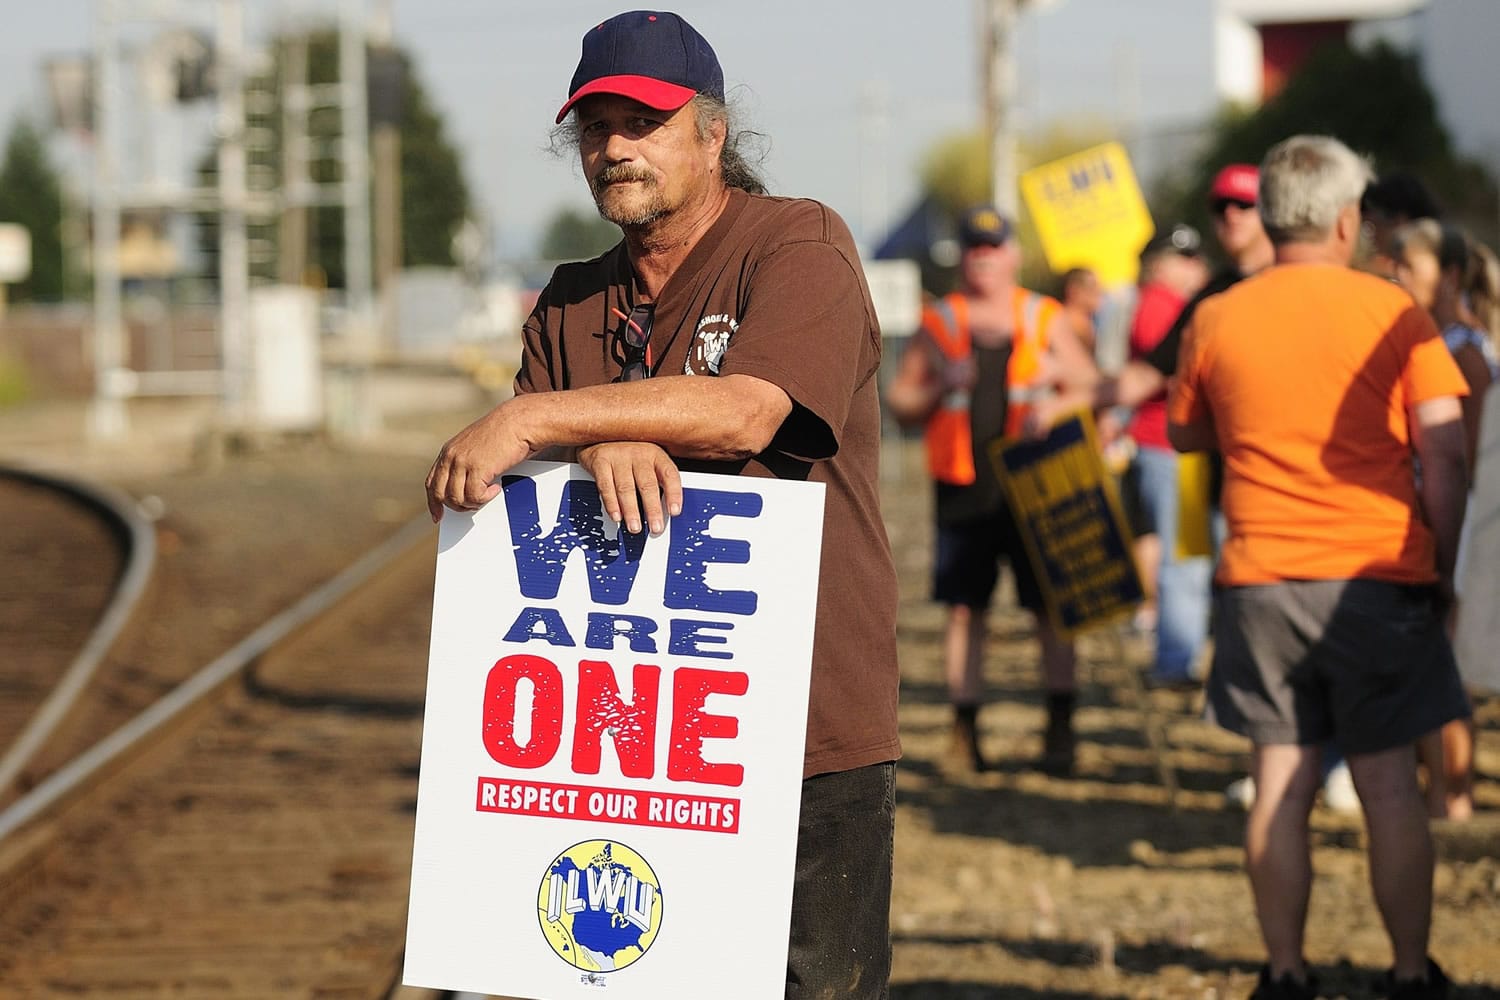 ILWU workers protest along rail lines on 8th Street on Wednesday in Vancouver.